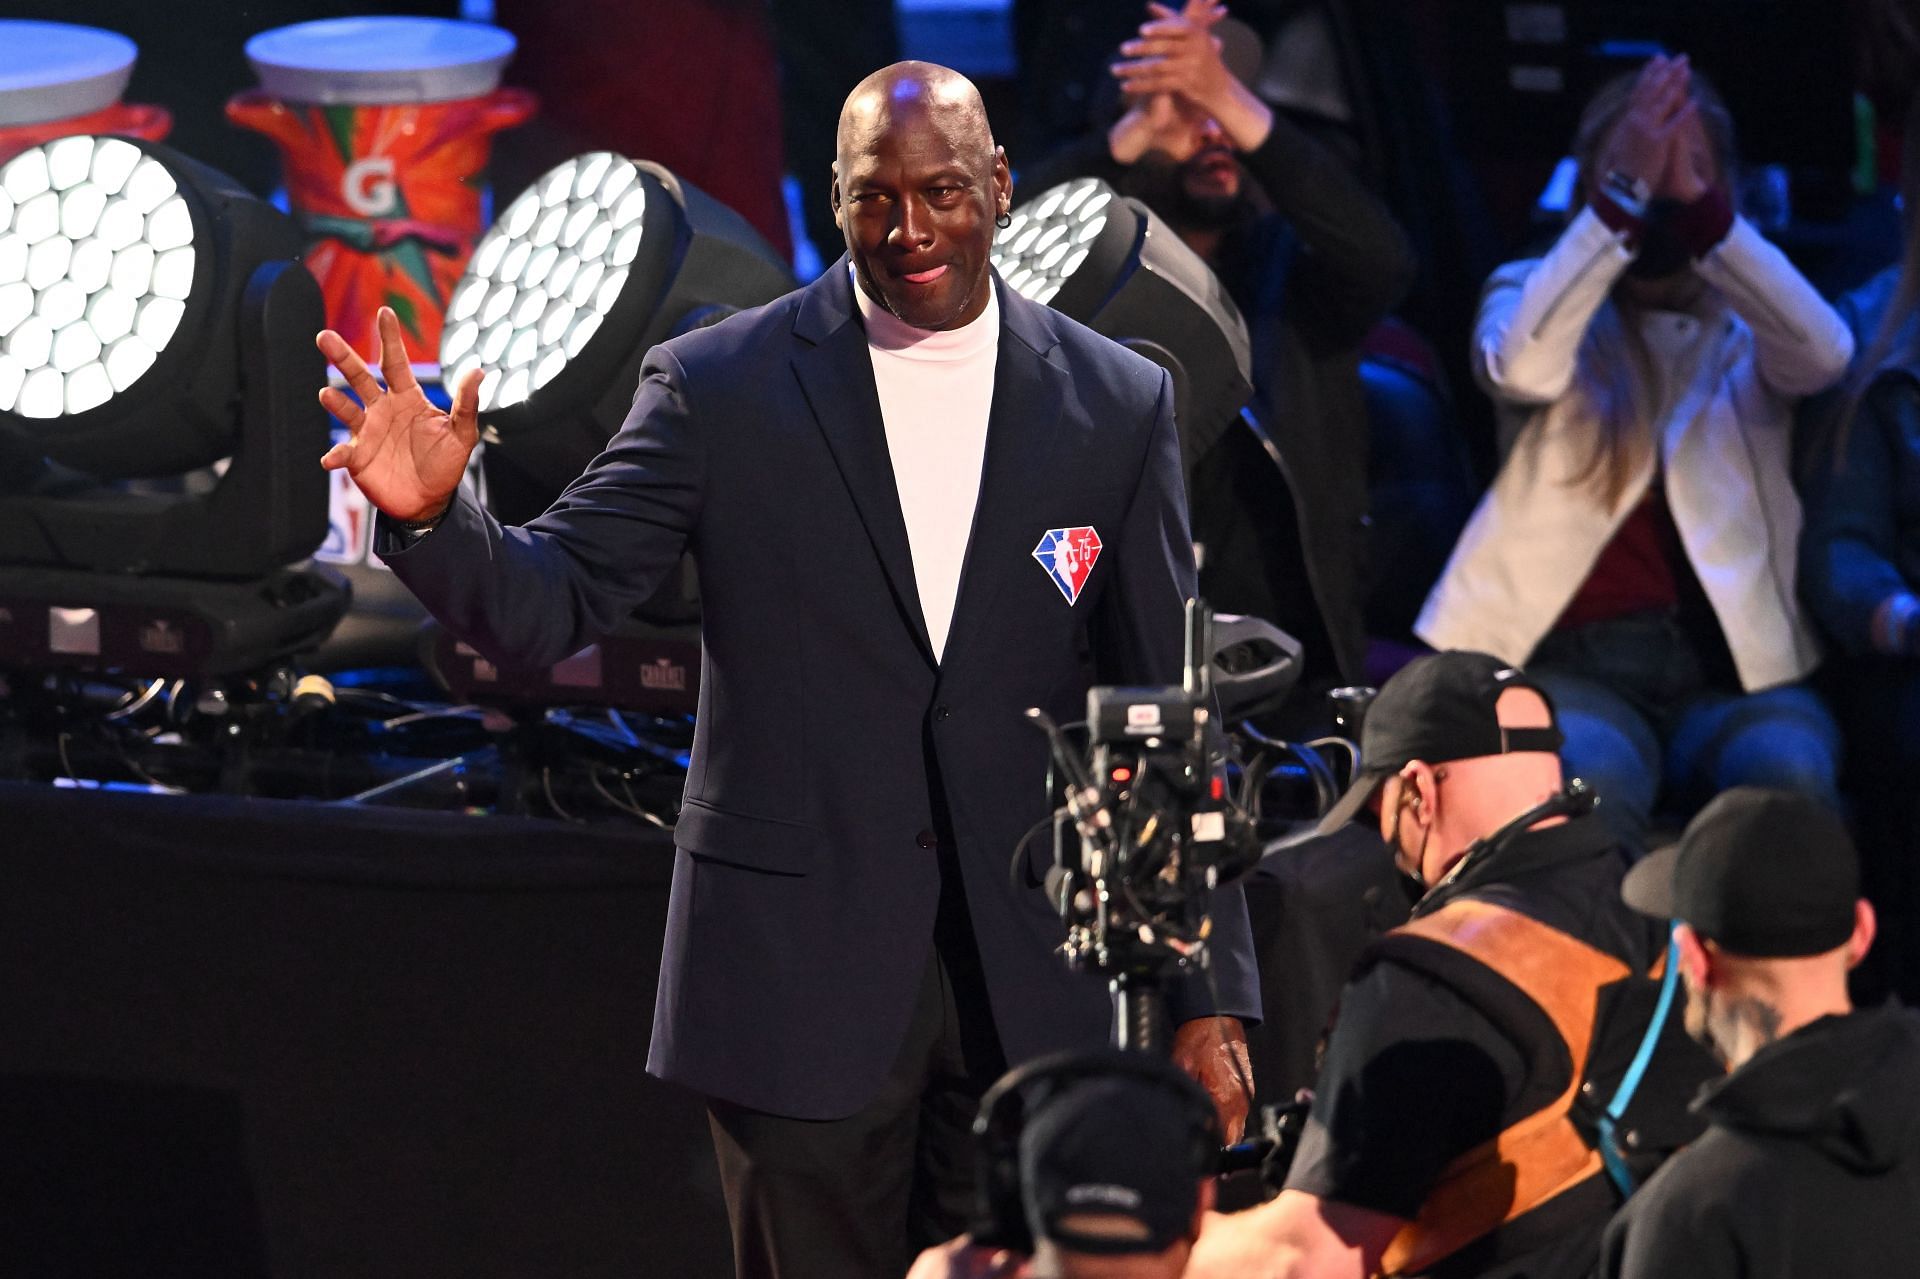 Michael Jordan reacts after being introduced as part of the NBA 75th Anniversary Team during the All-Star Game on Feb. 20 in Cleveland, Ohio.